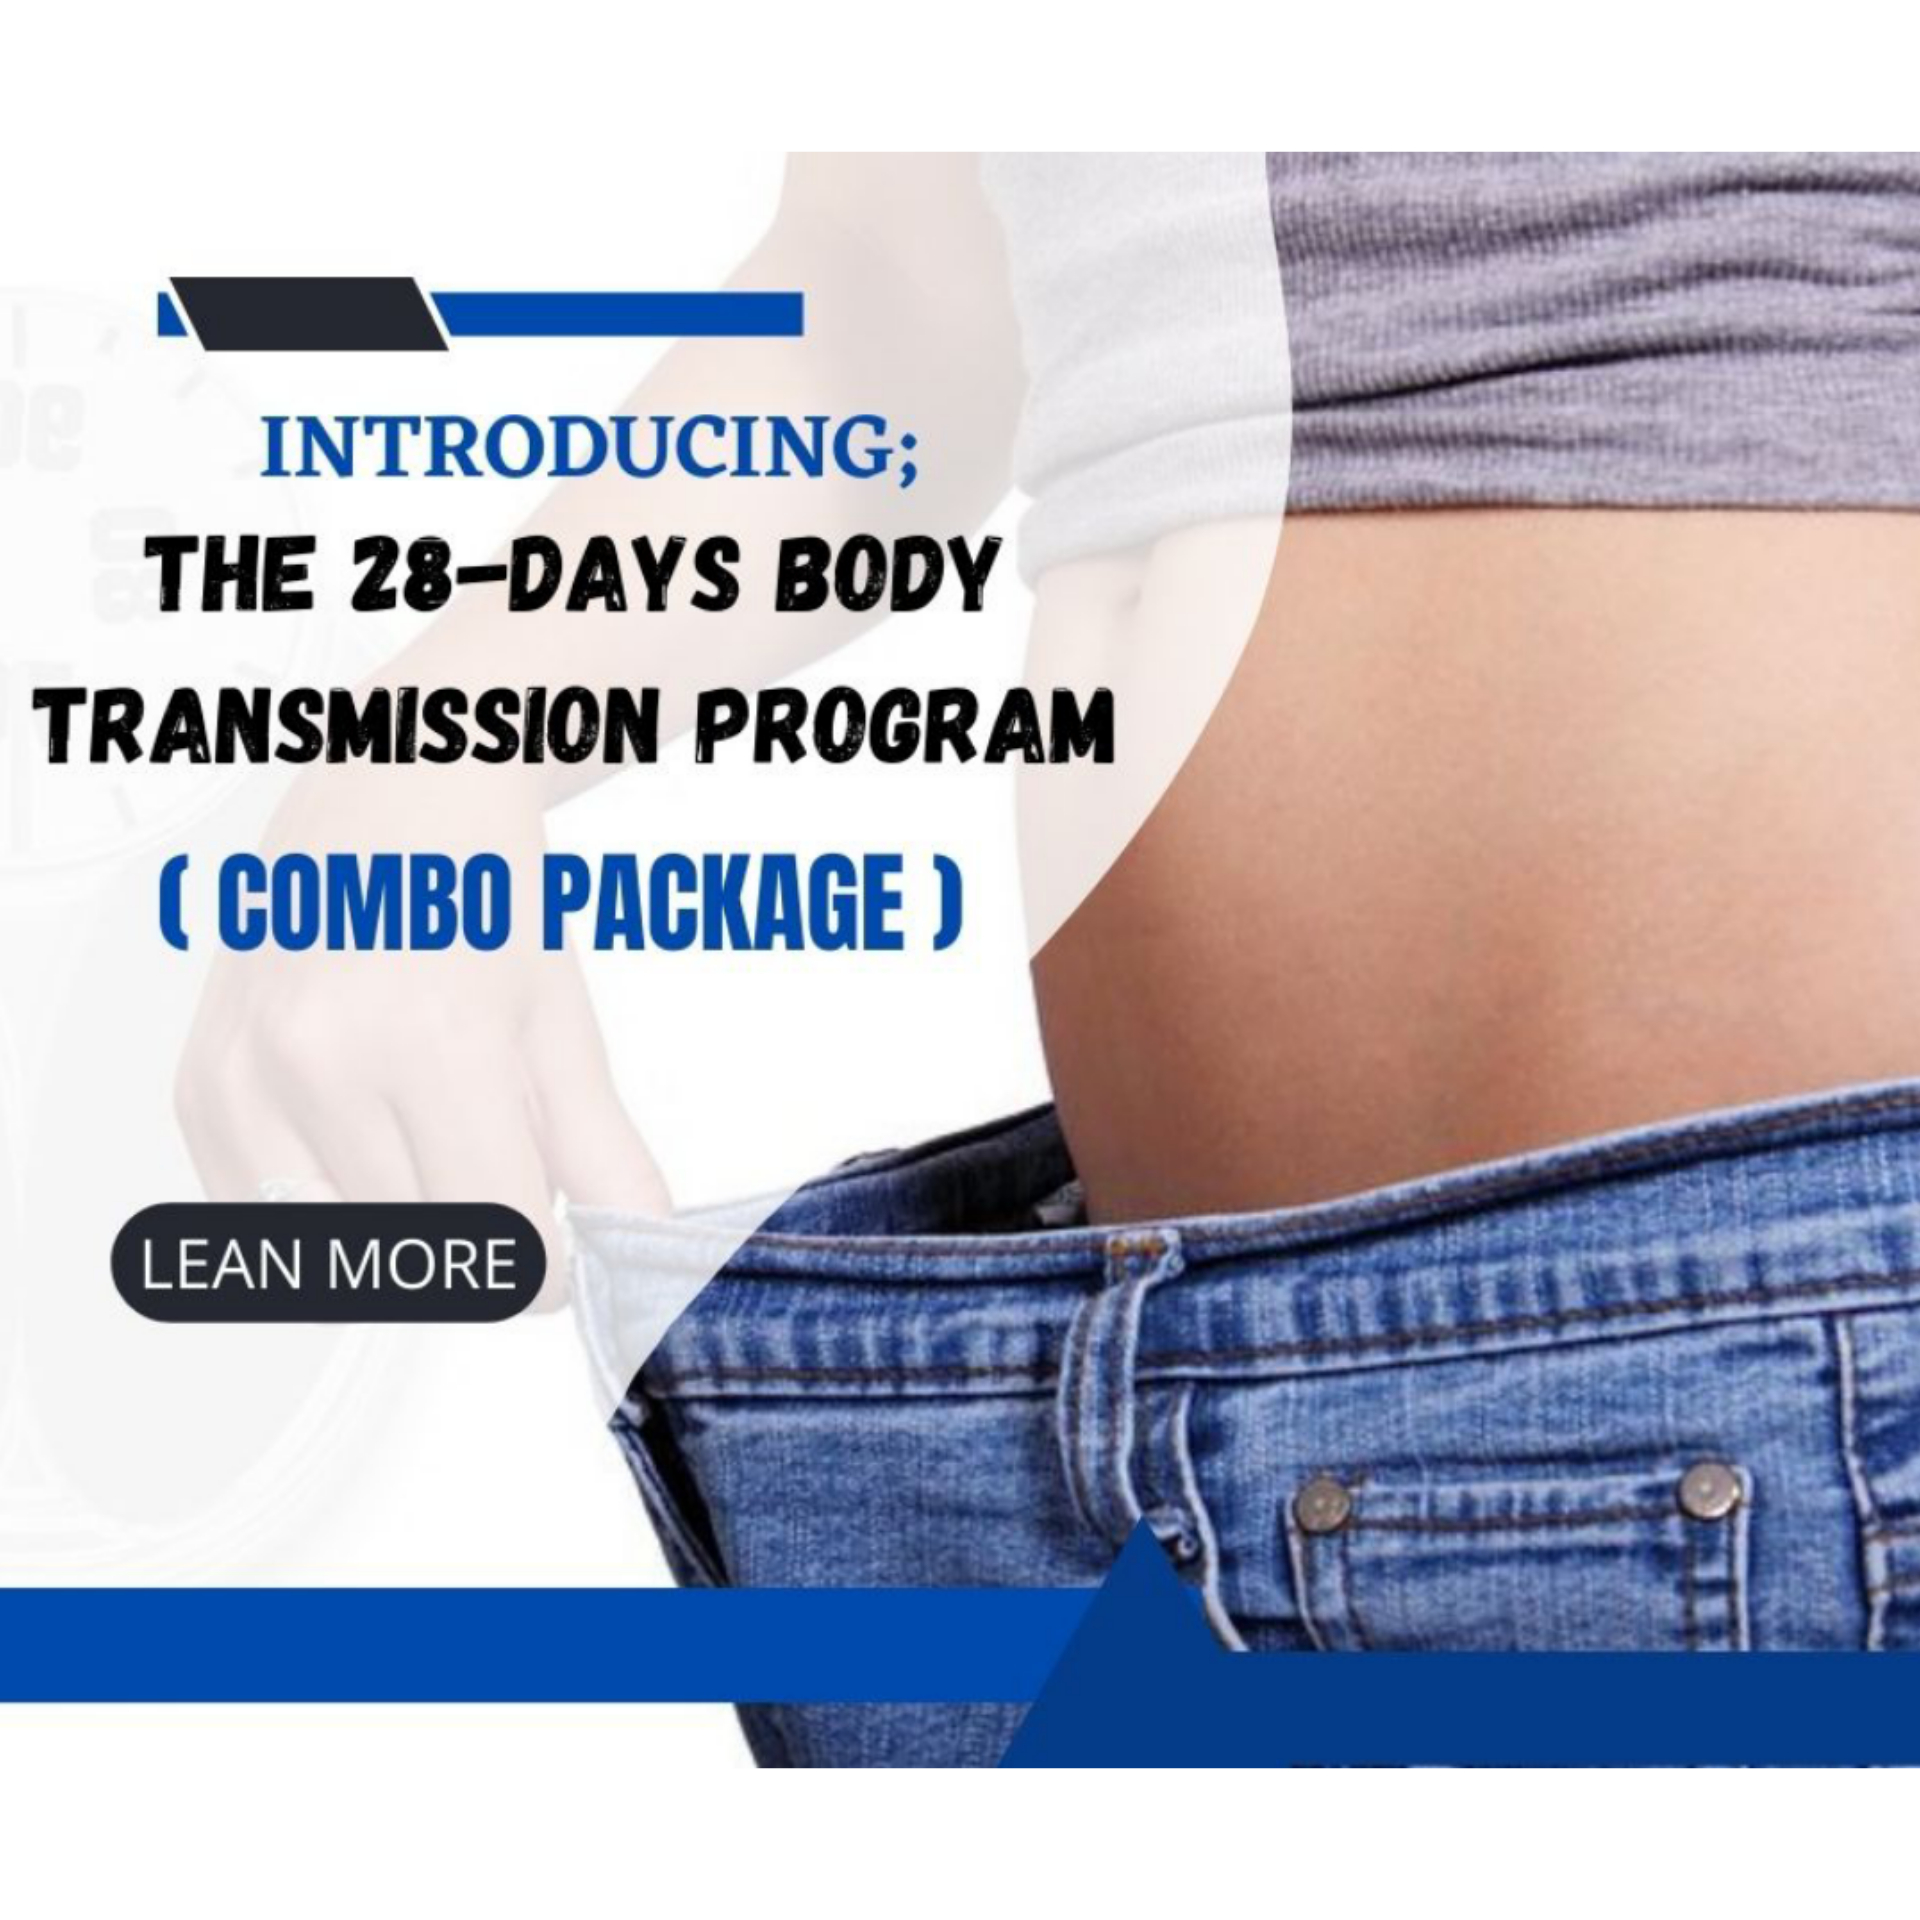 INTRODUCING: The 28-Day Body Transformation Program ( COMBO PACKAGE )